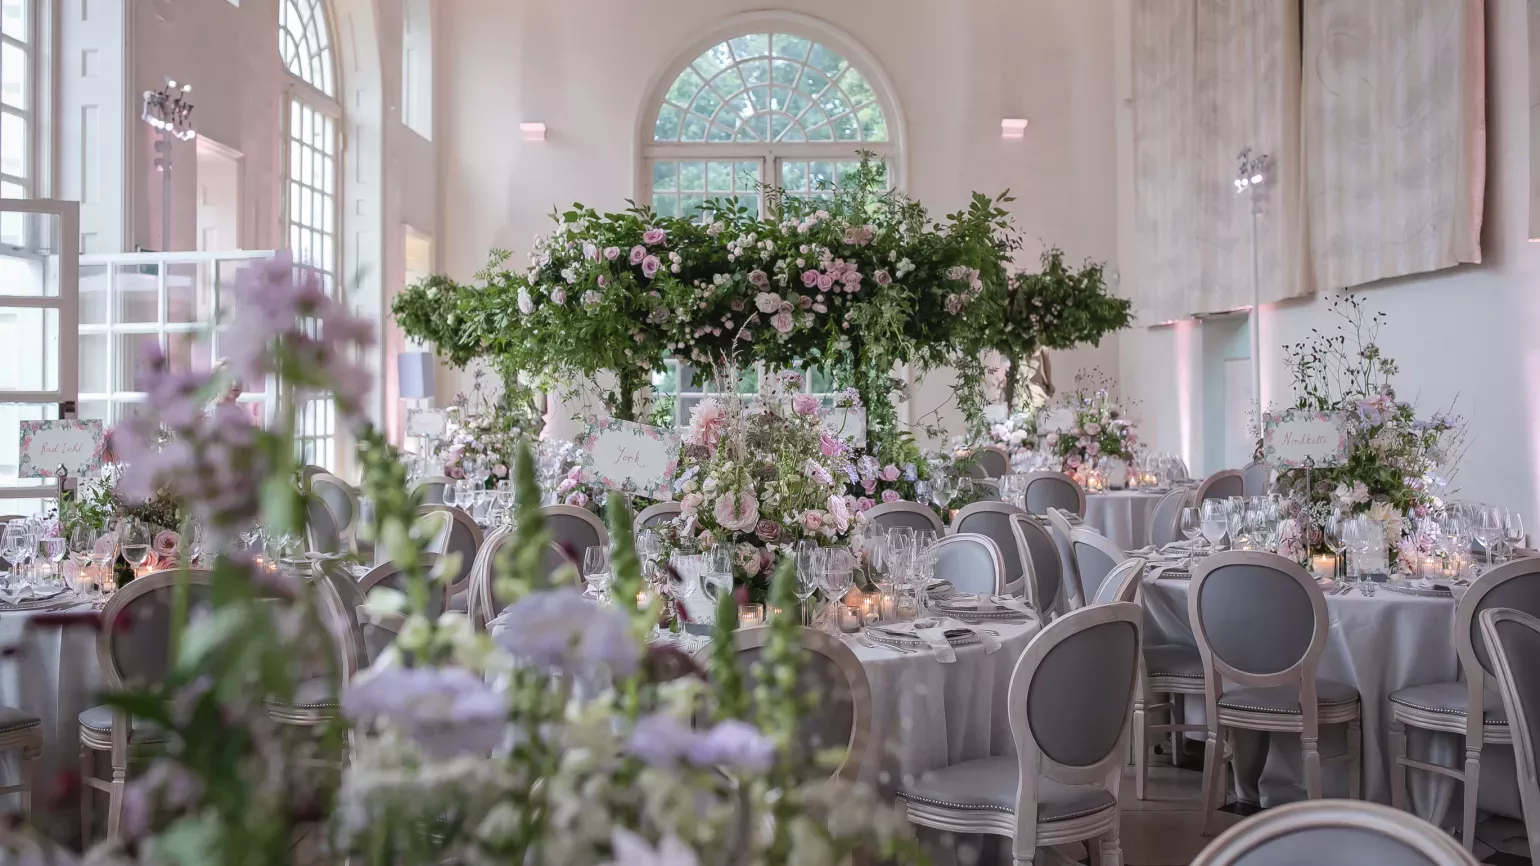 White chairs and tables decorated with white and pink flowers